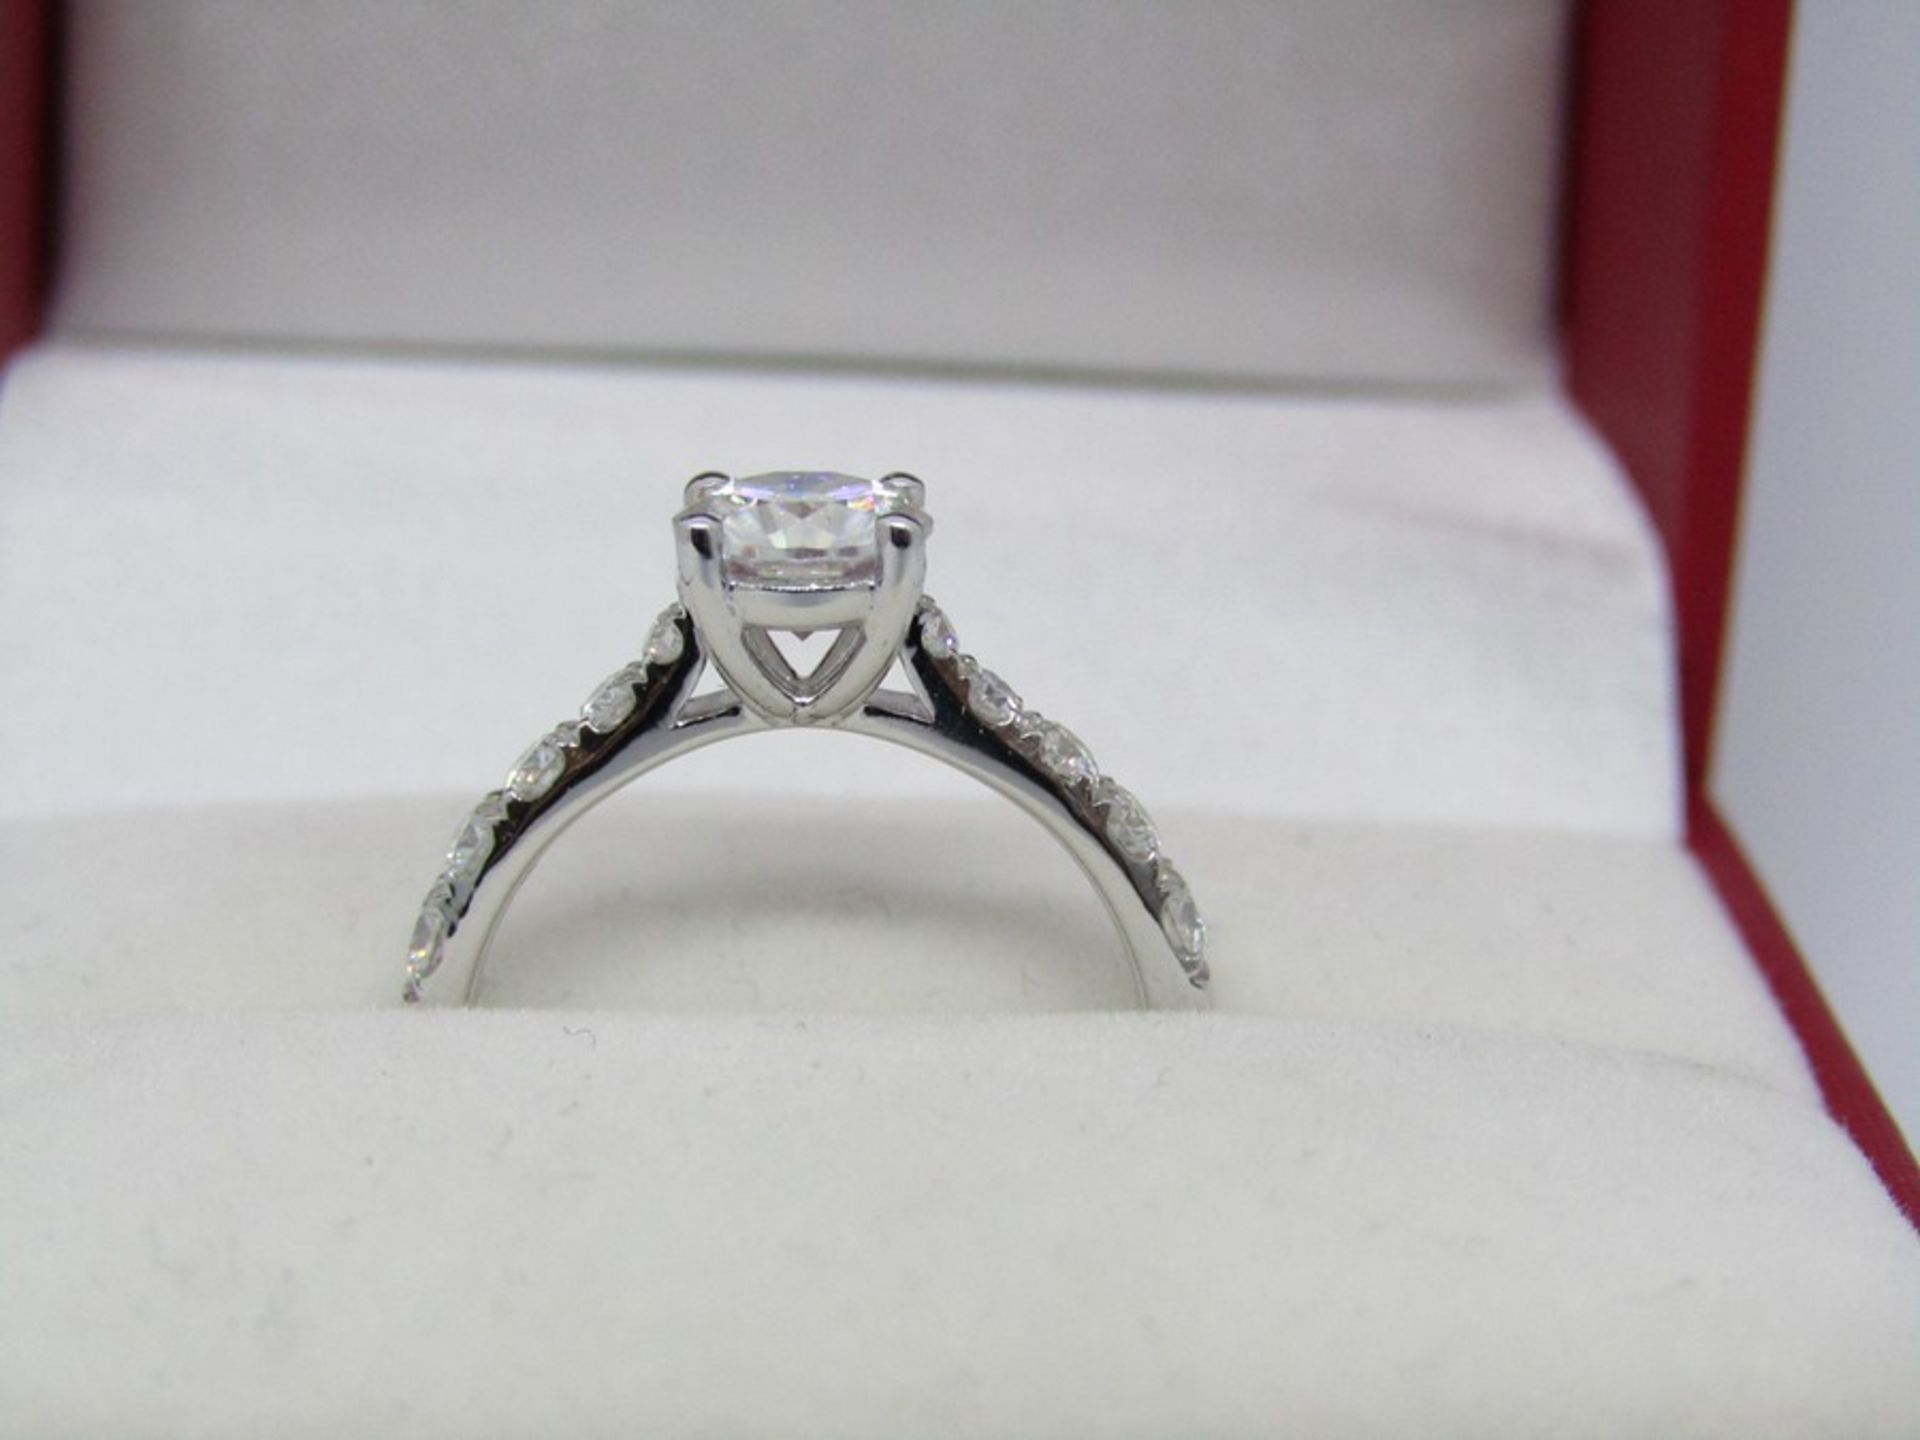 1ct Moissanite Ring set in 18ct White Gold, new. - Image 5 of 7